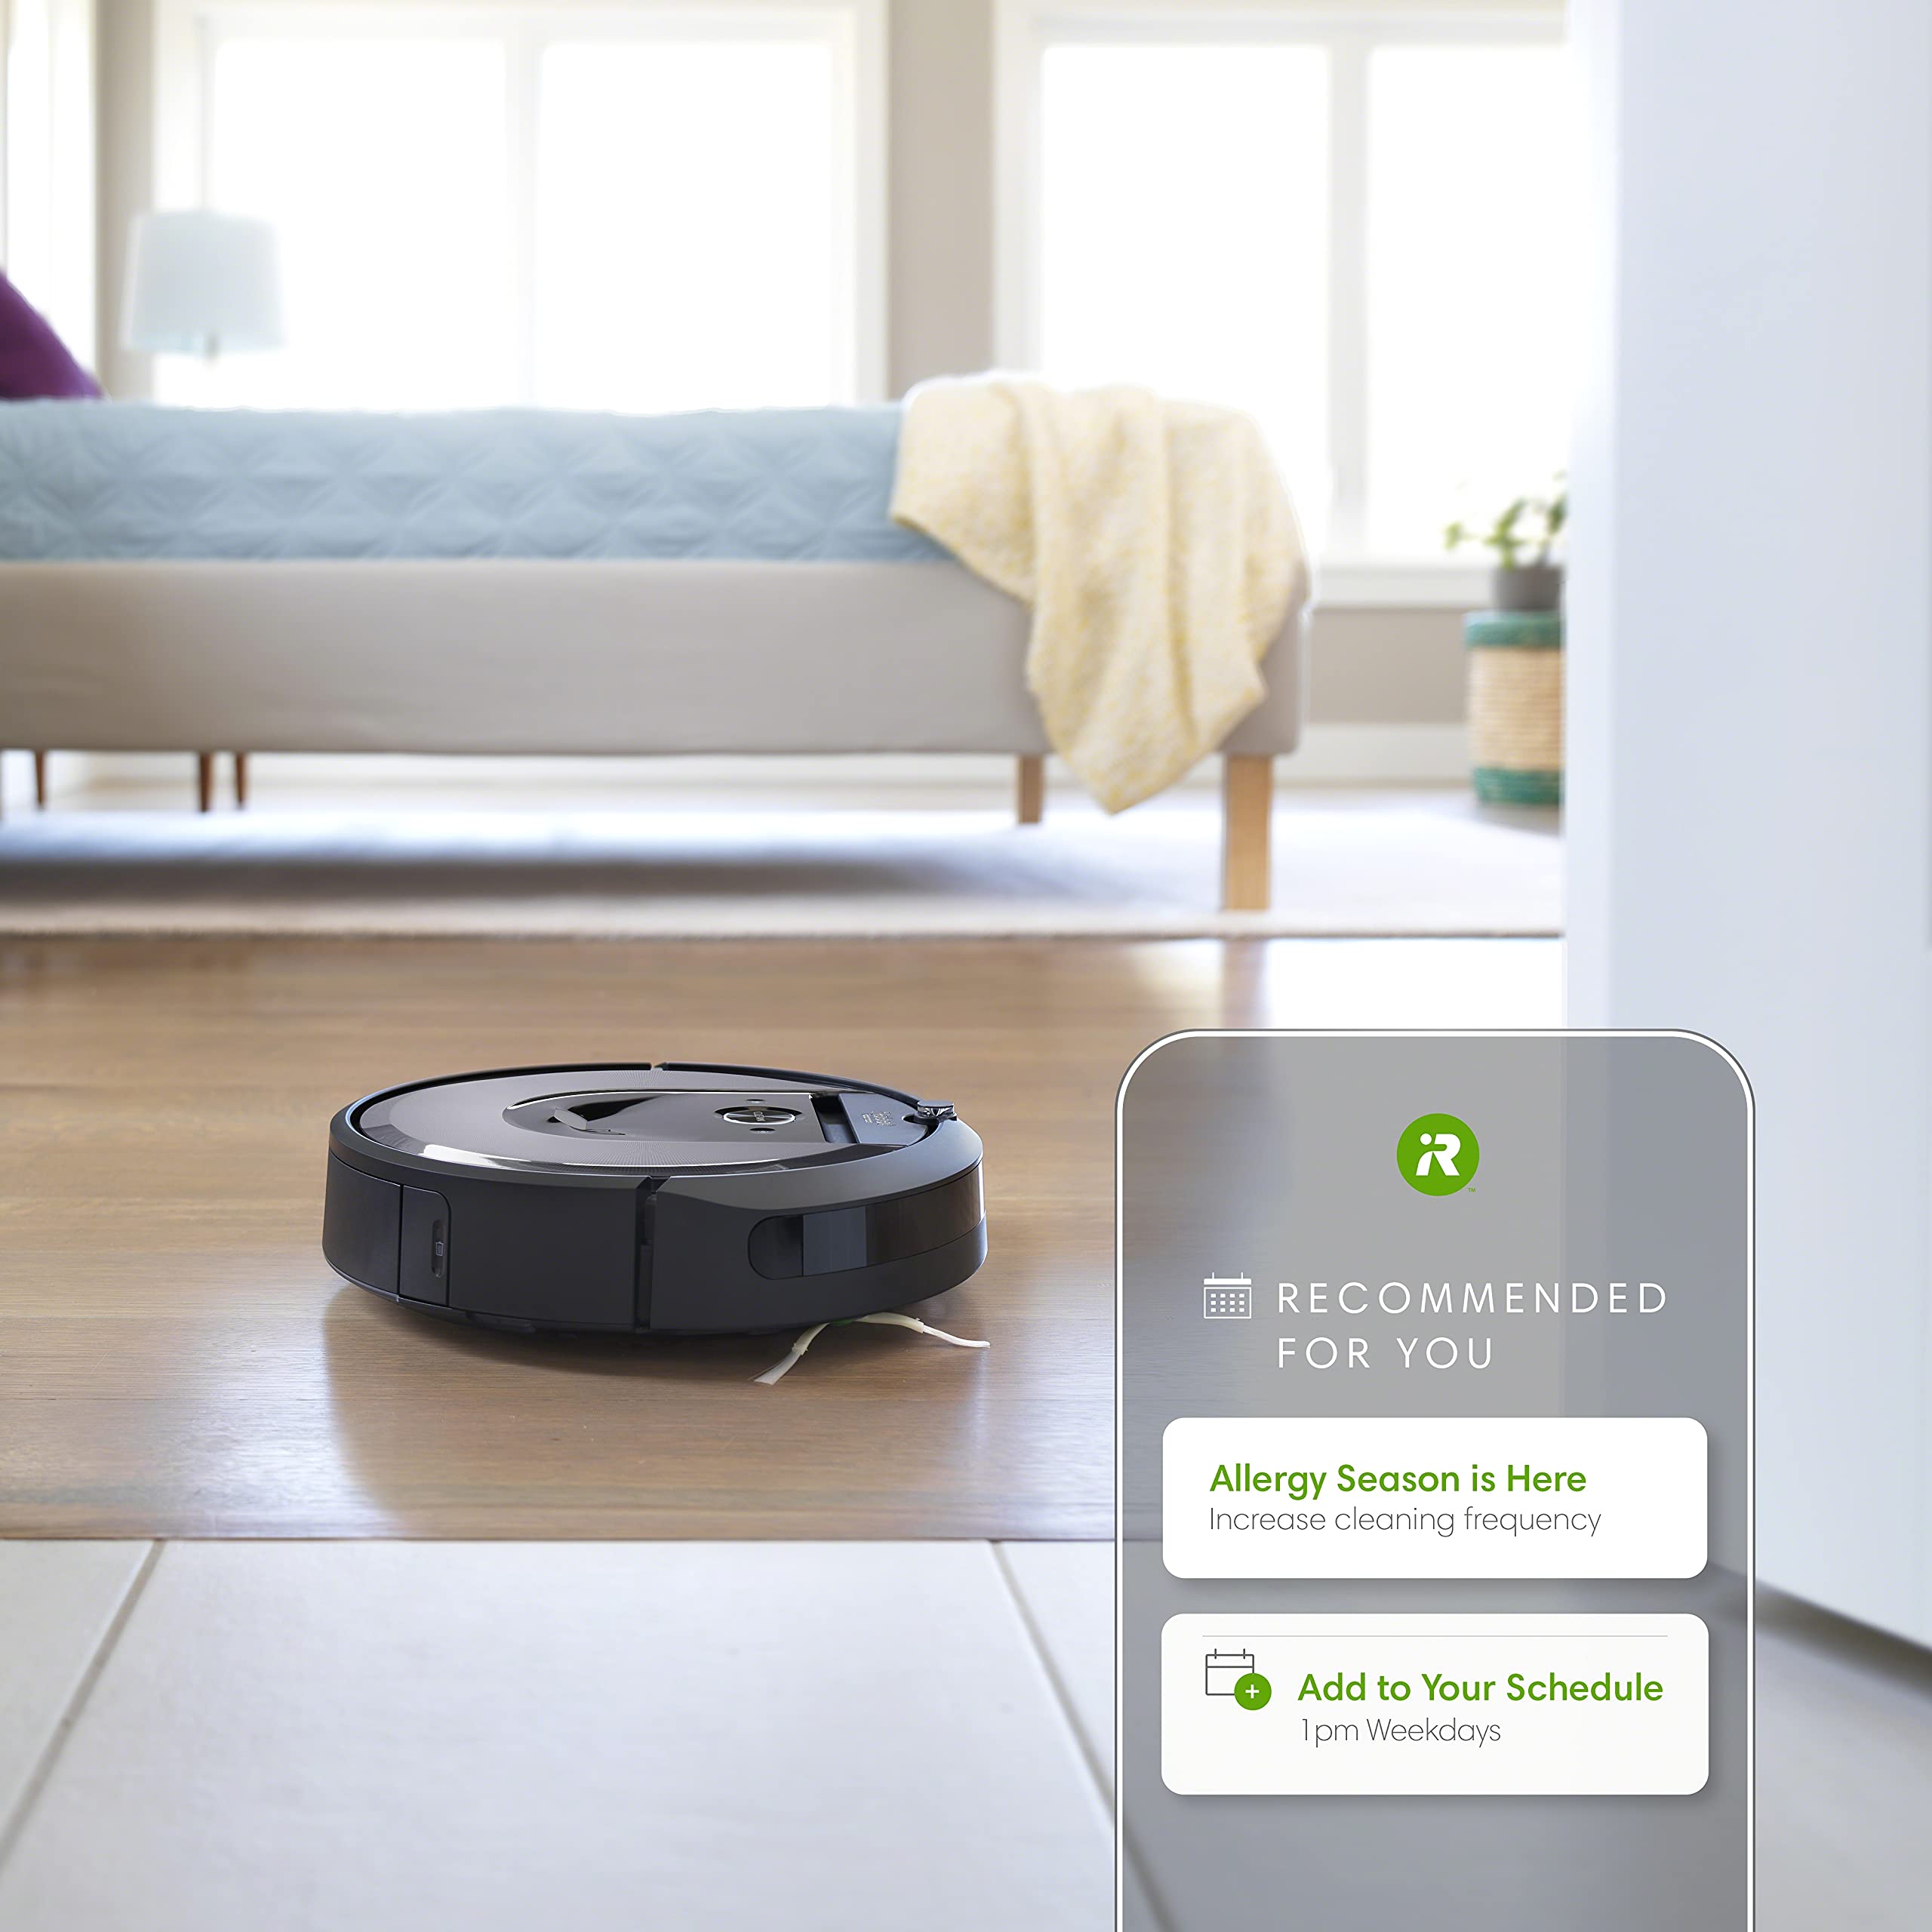 iRobot Roomba i7 (7150) Robot Vacuum- Wi-Fi Connected, Smart Mapping, Works with Alexa, Ideal for Pet Hair, Works With Clean Base, Black (7928583422190)